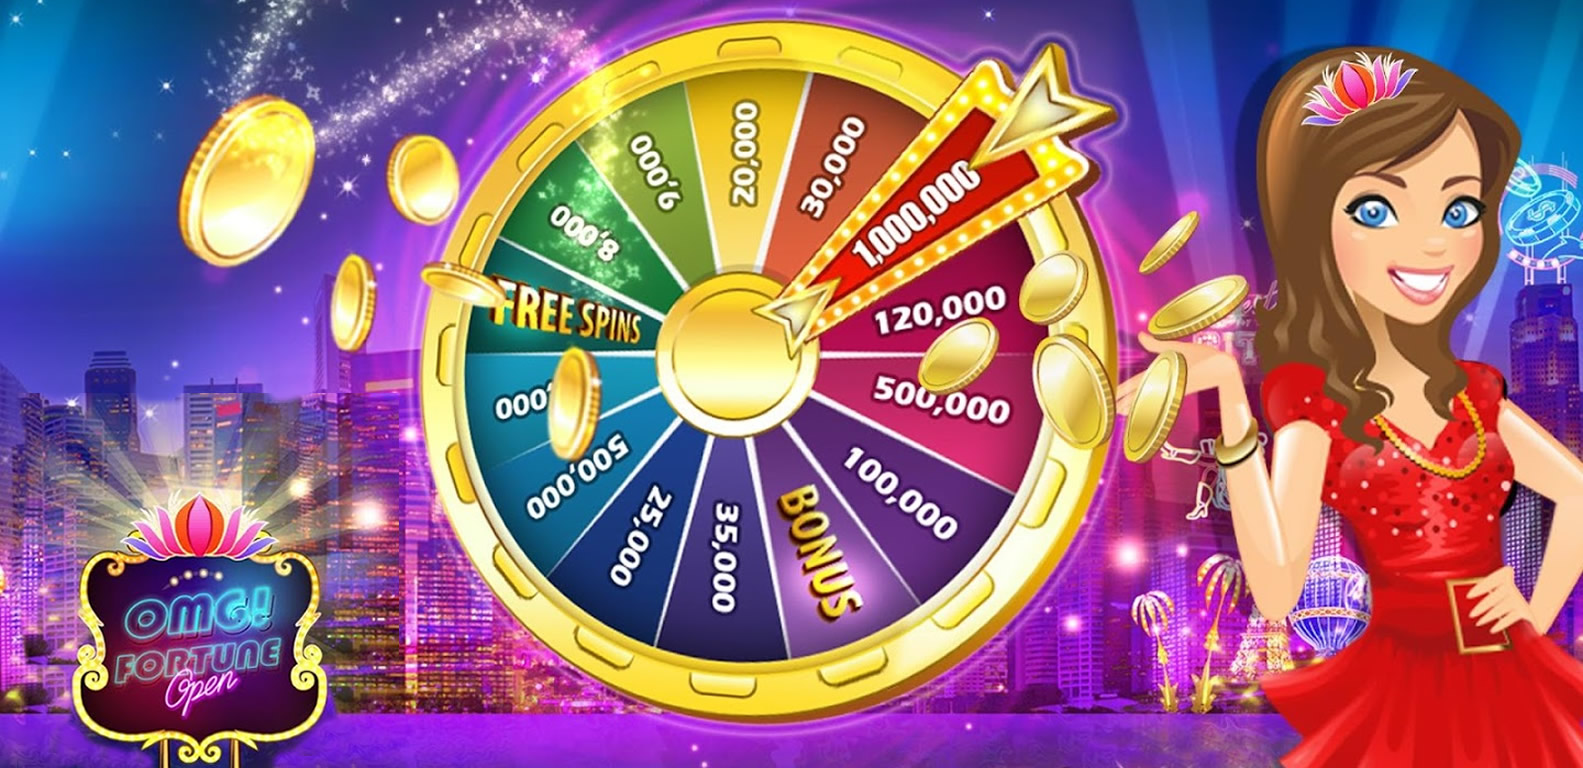 OMG! Fortune Free Slots Review